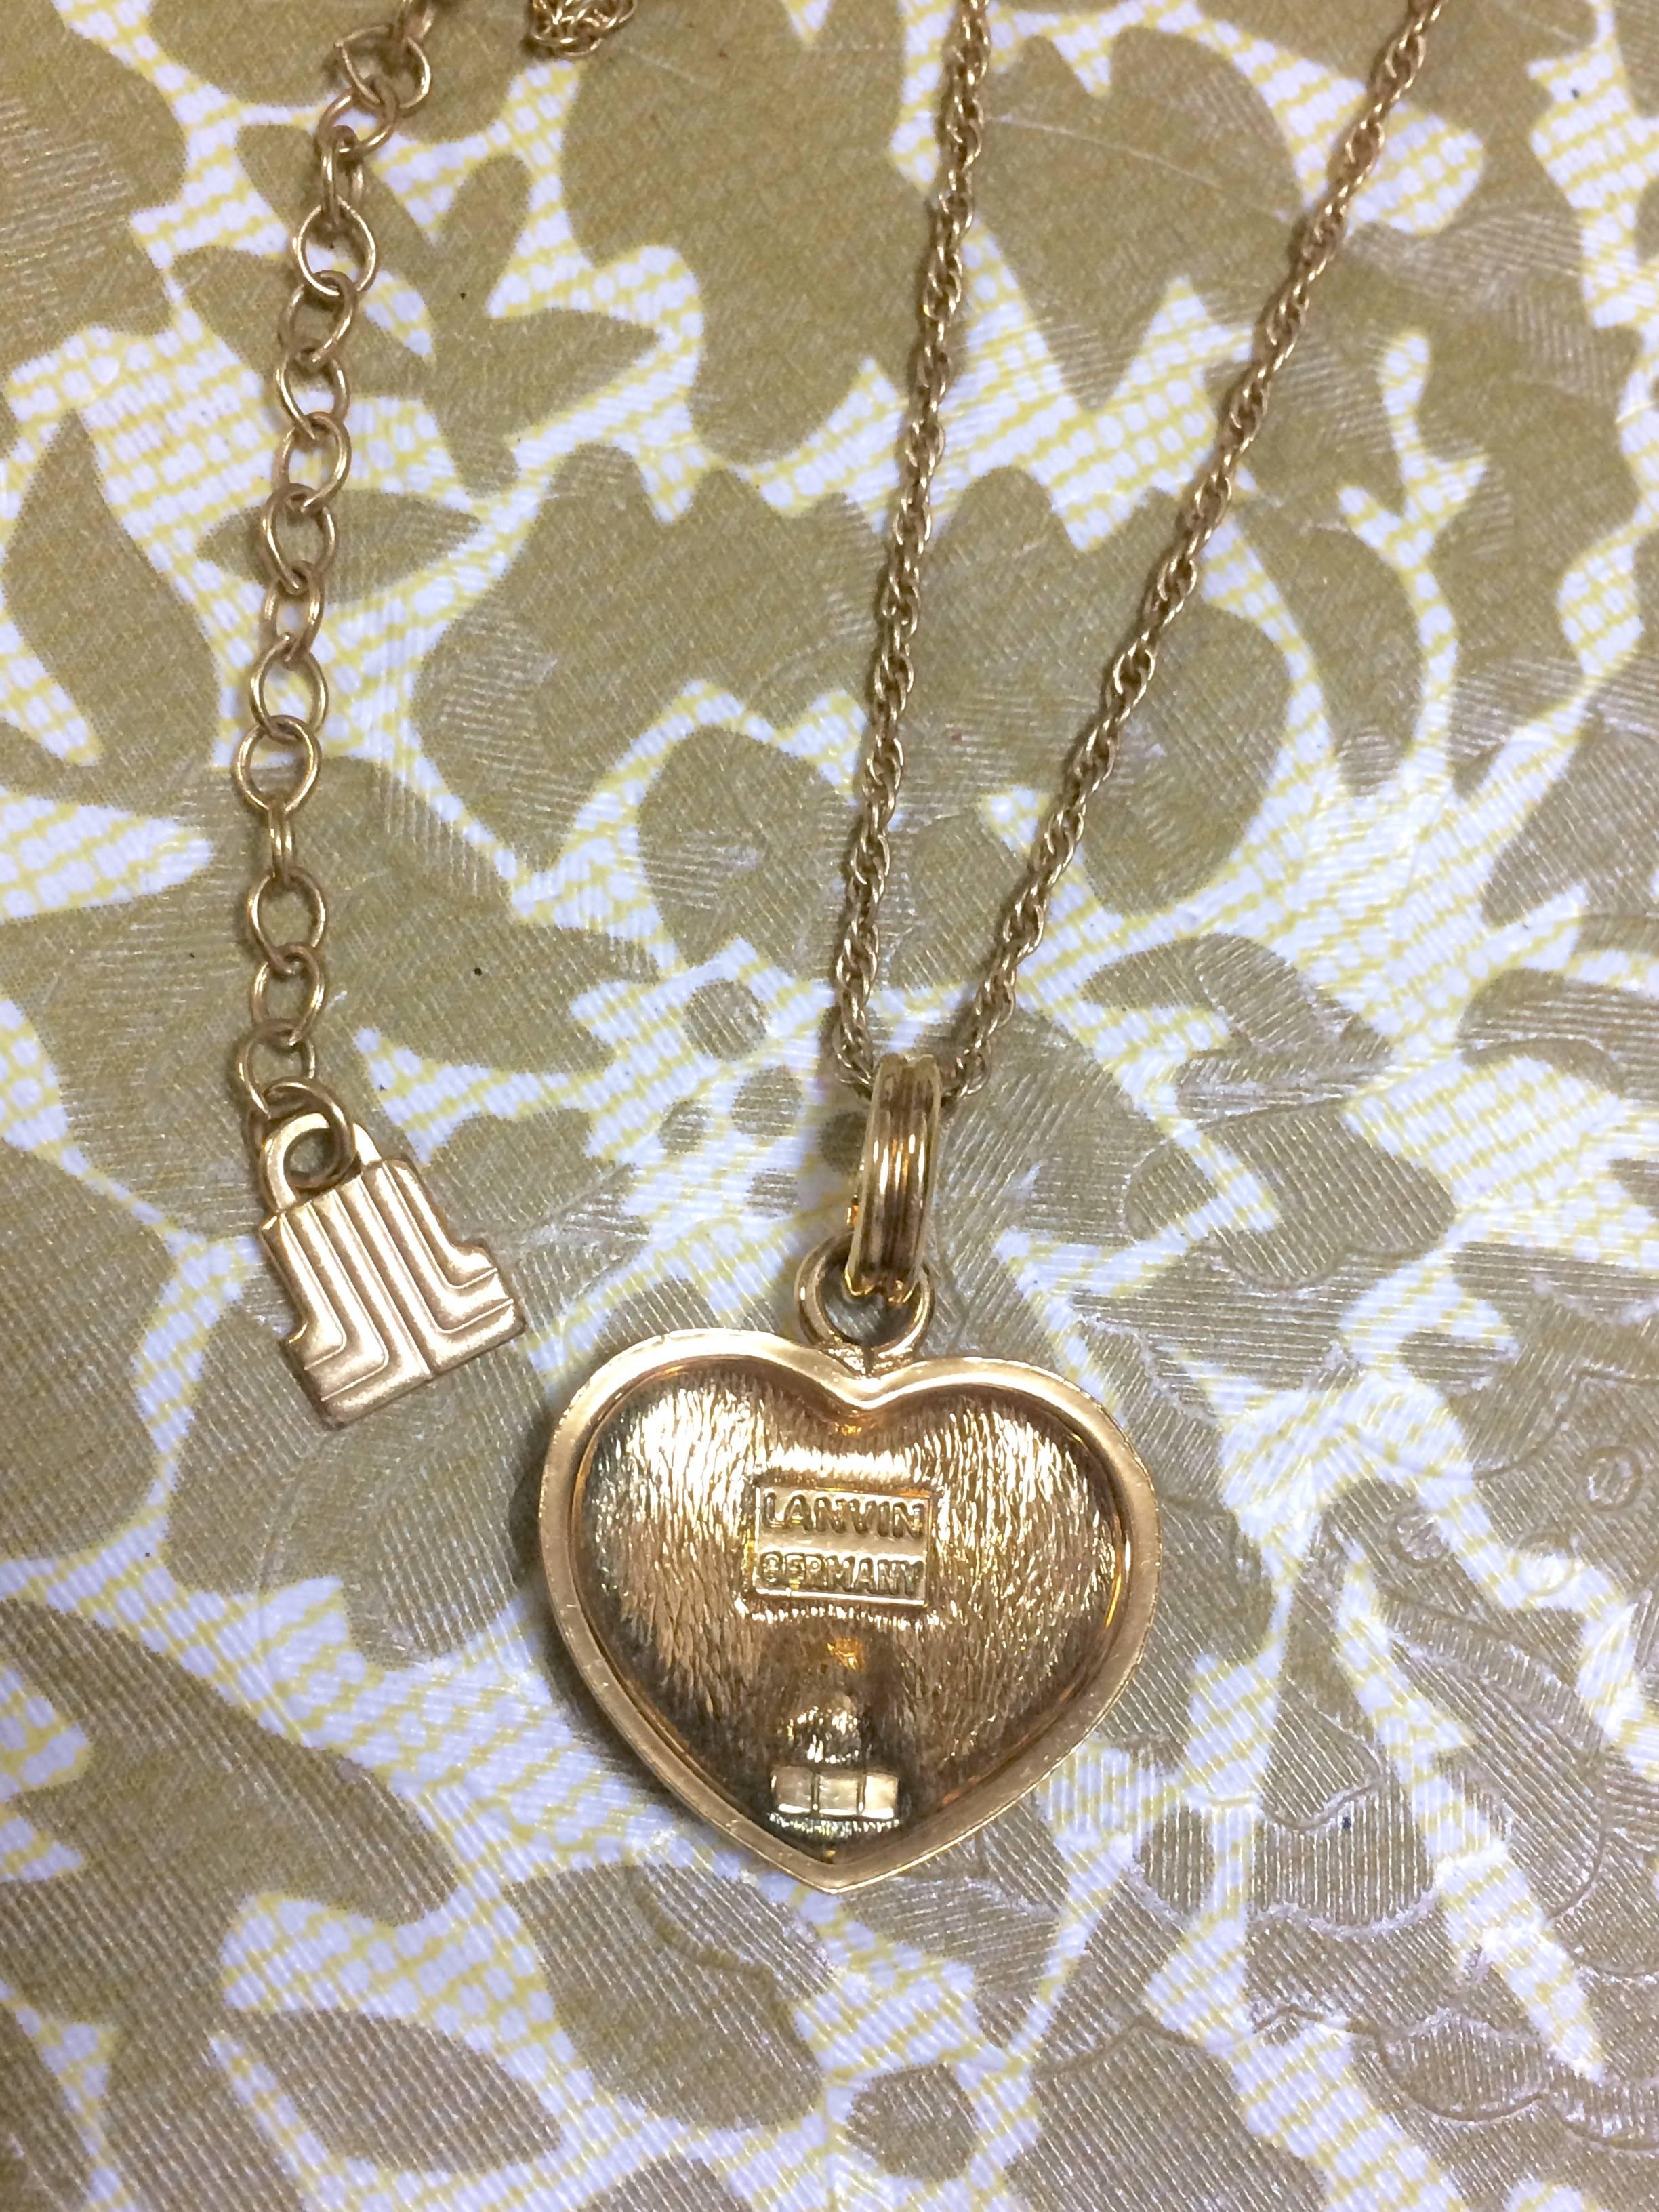 Vintage LANVIN skinny chain necklace with heart logo charm crystal pendant top For Sale 1